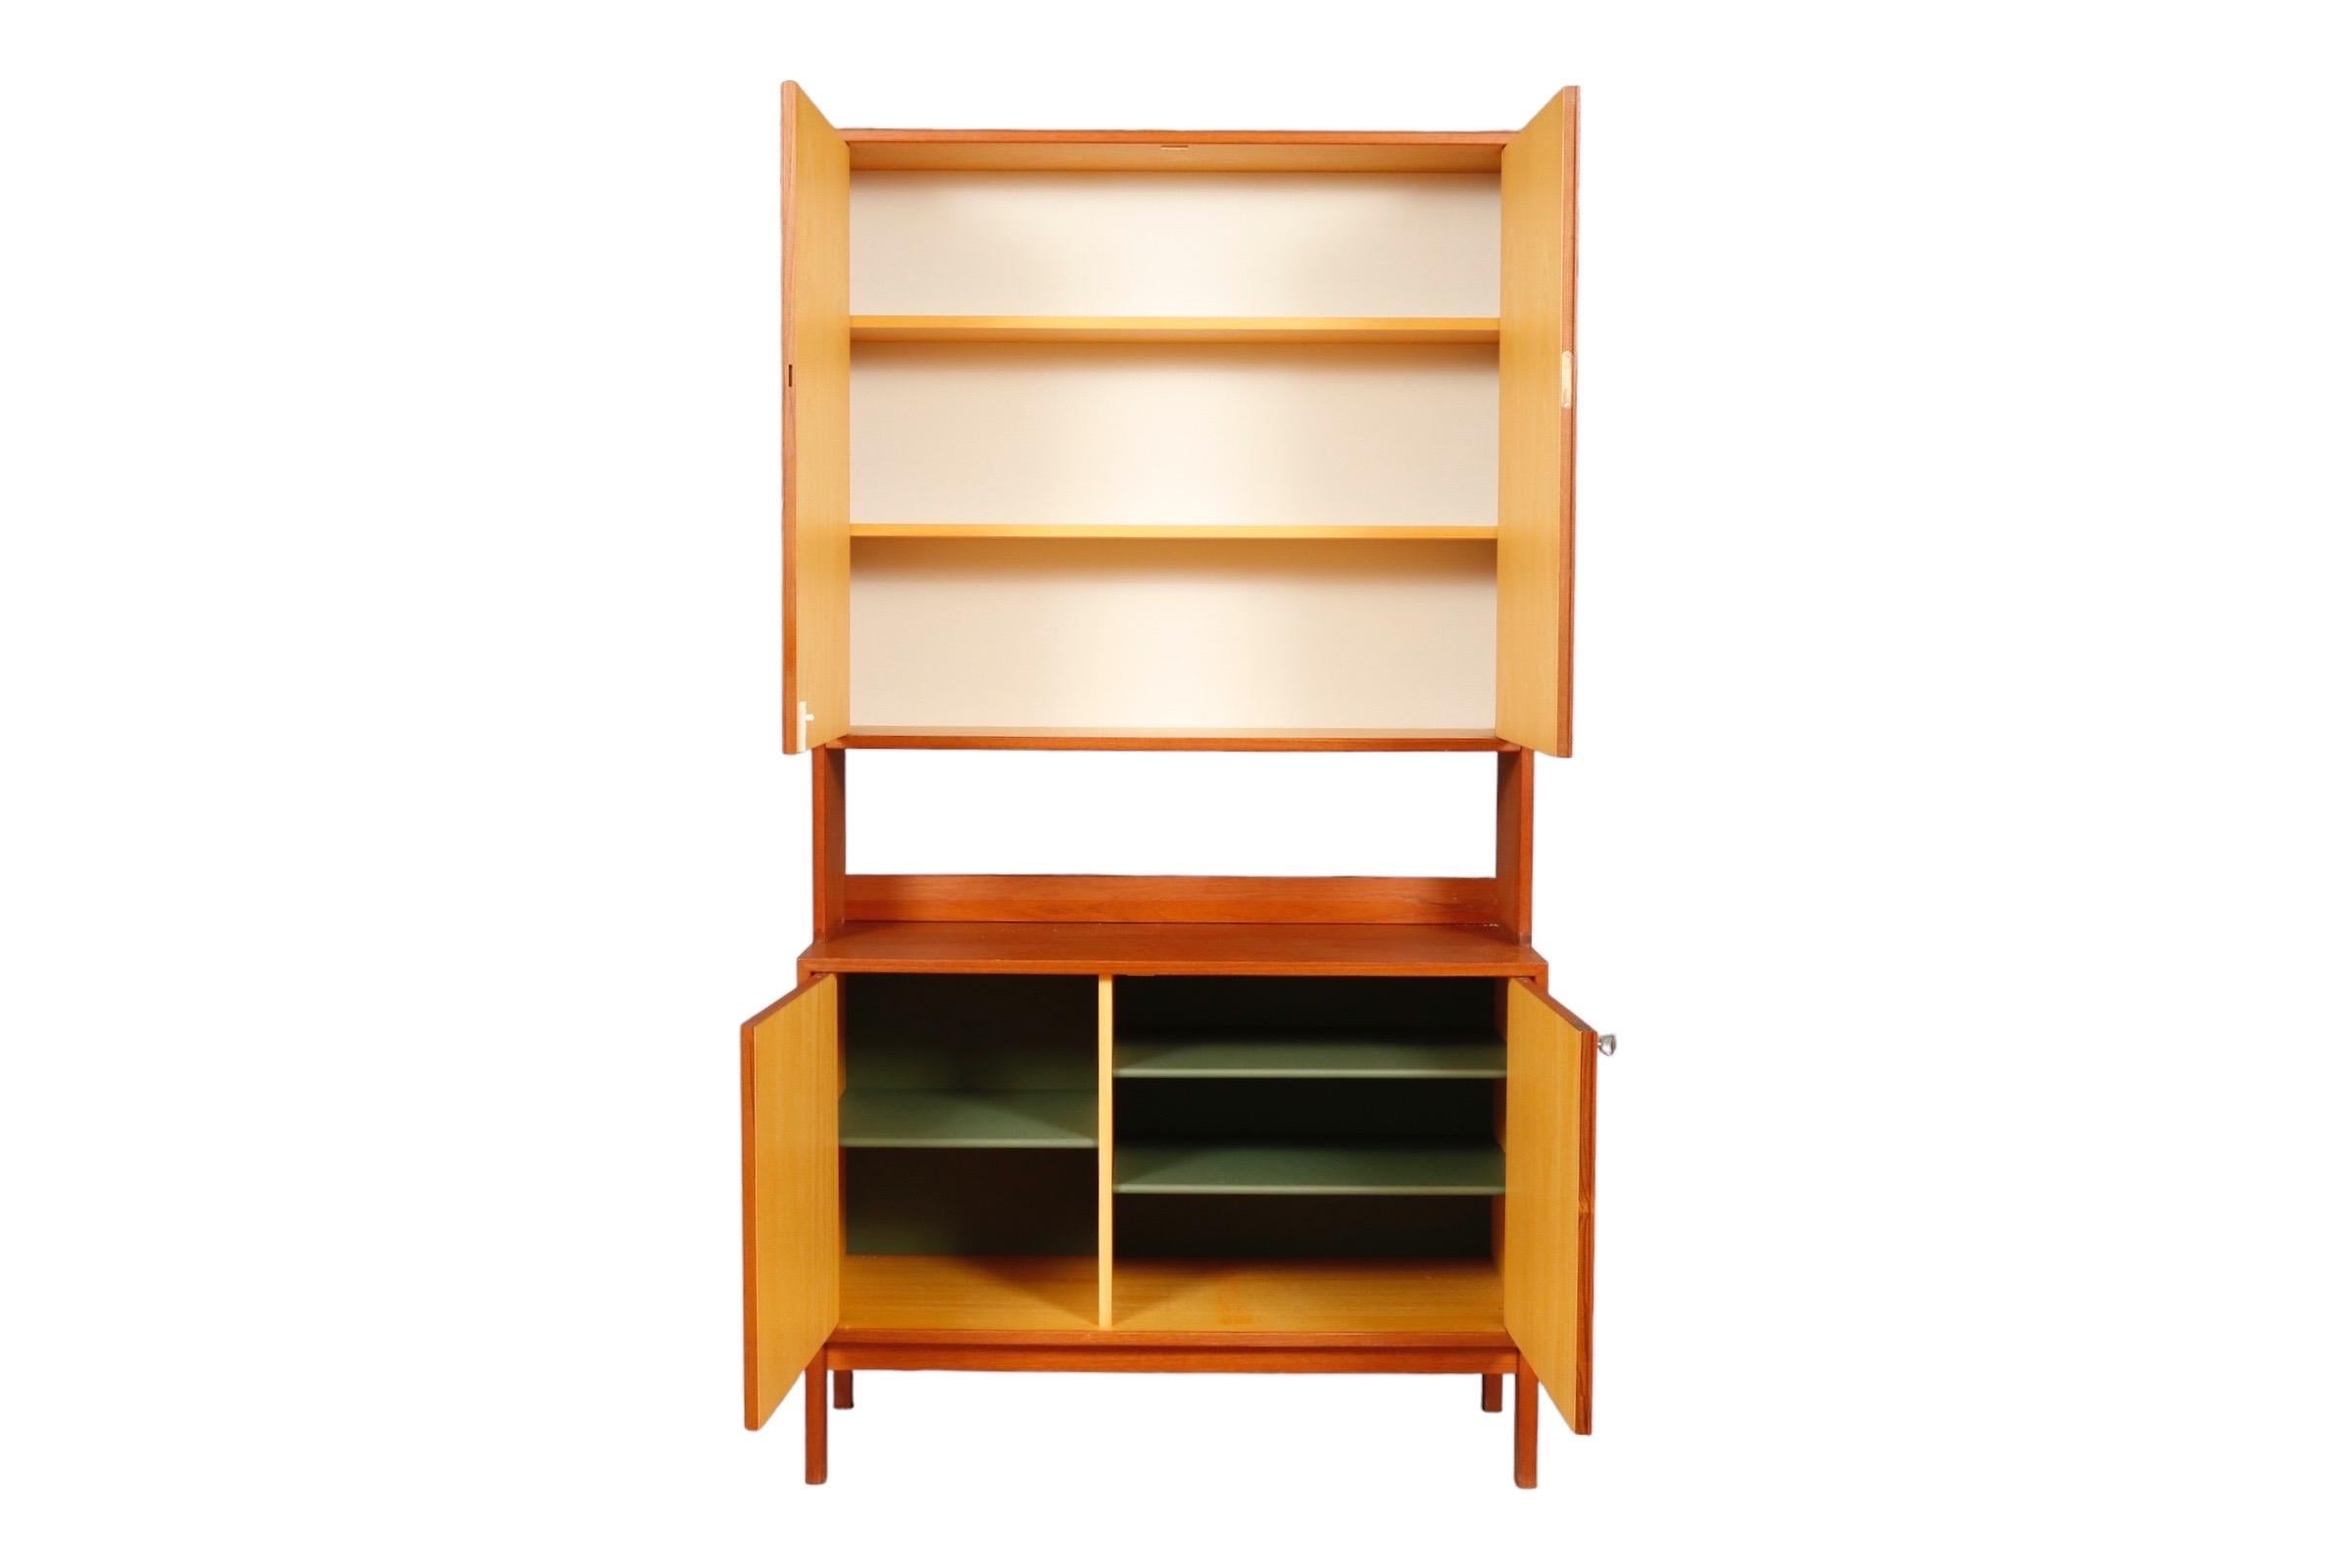 A mid-century hutch cabinet in teak. Upper and lower cabinets house shelves, the interior of the lower cabinet is painted sage. Cabinet doors have a decorative paneled construction.